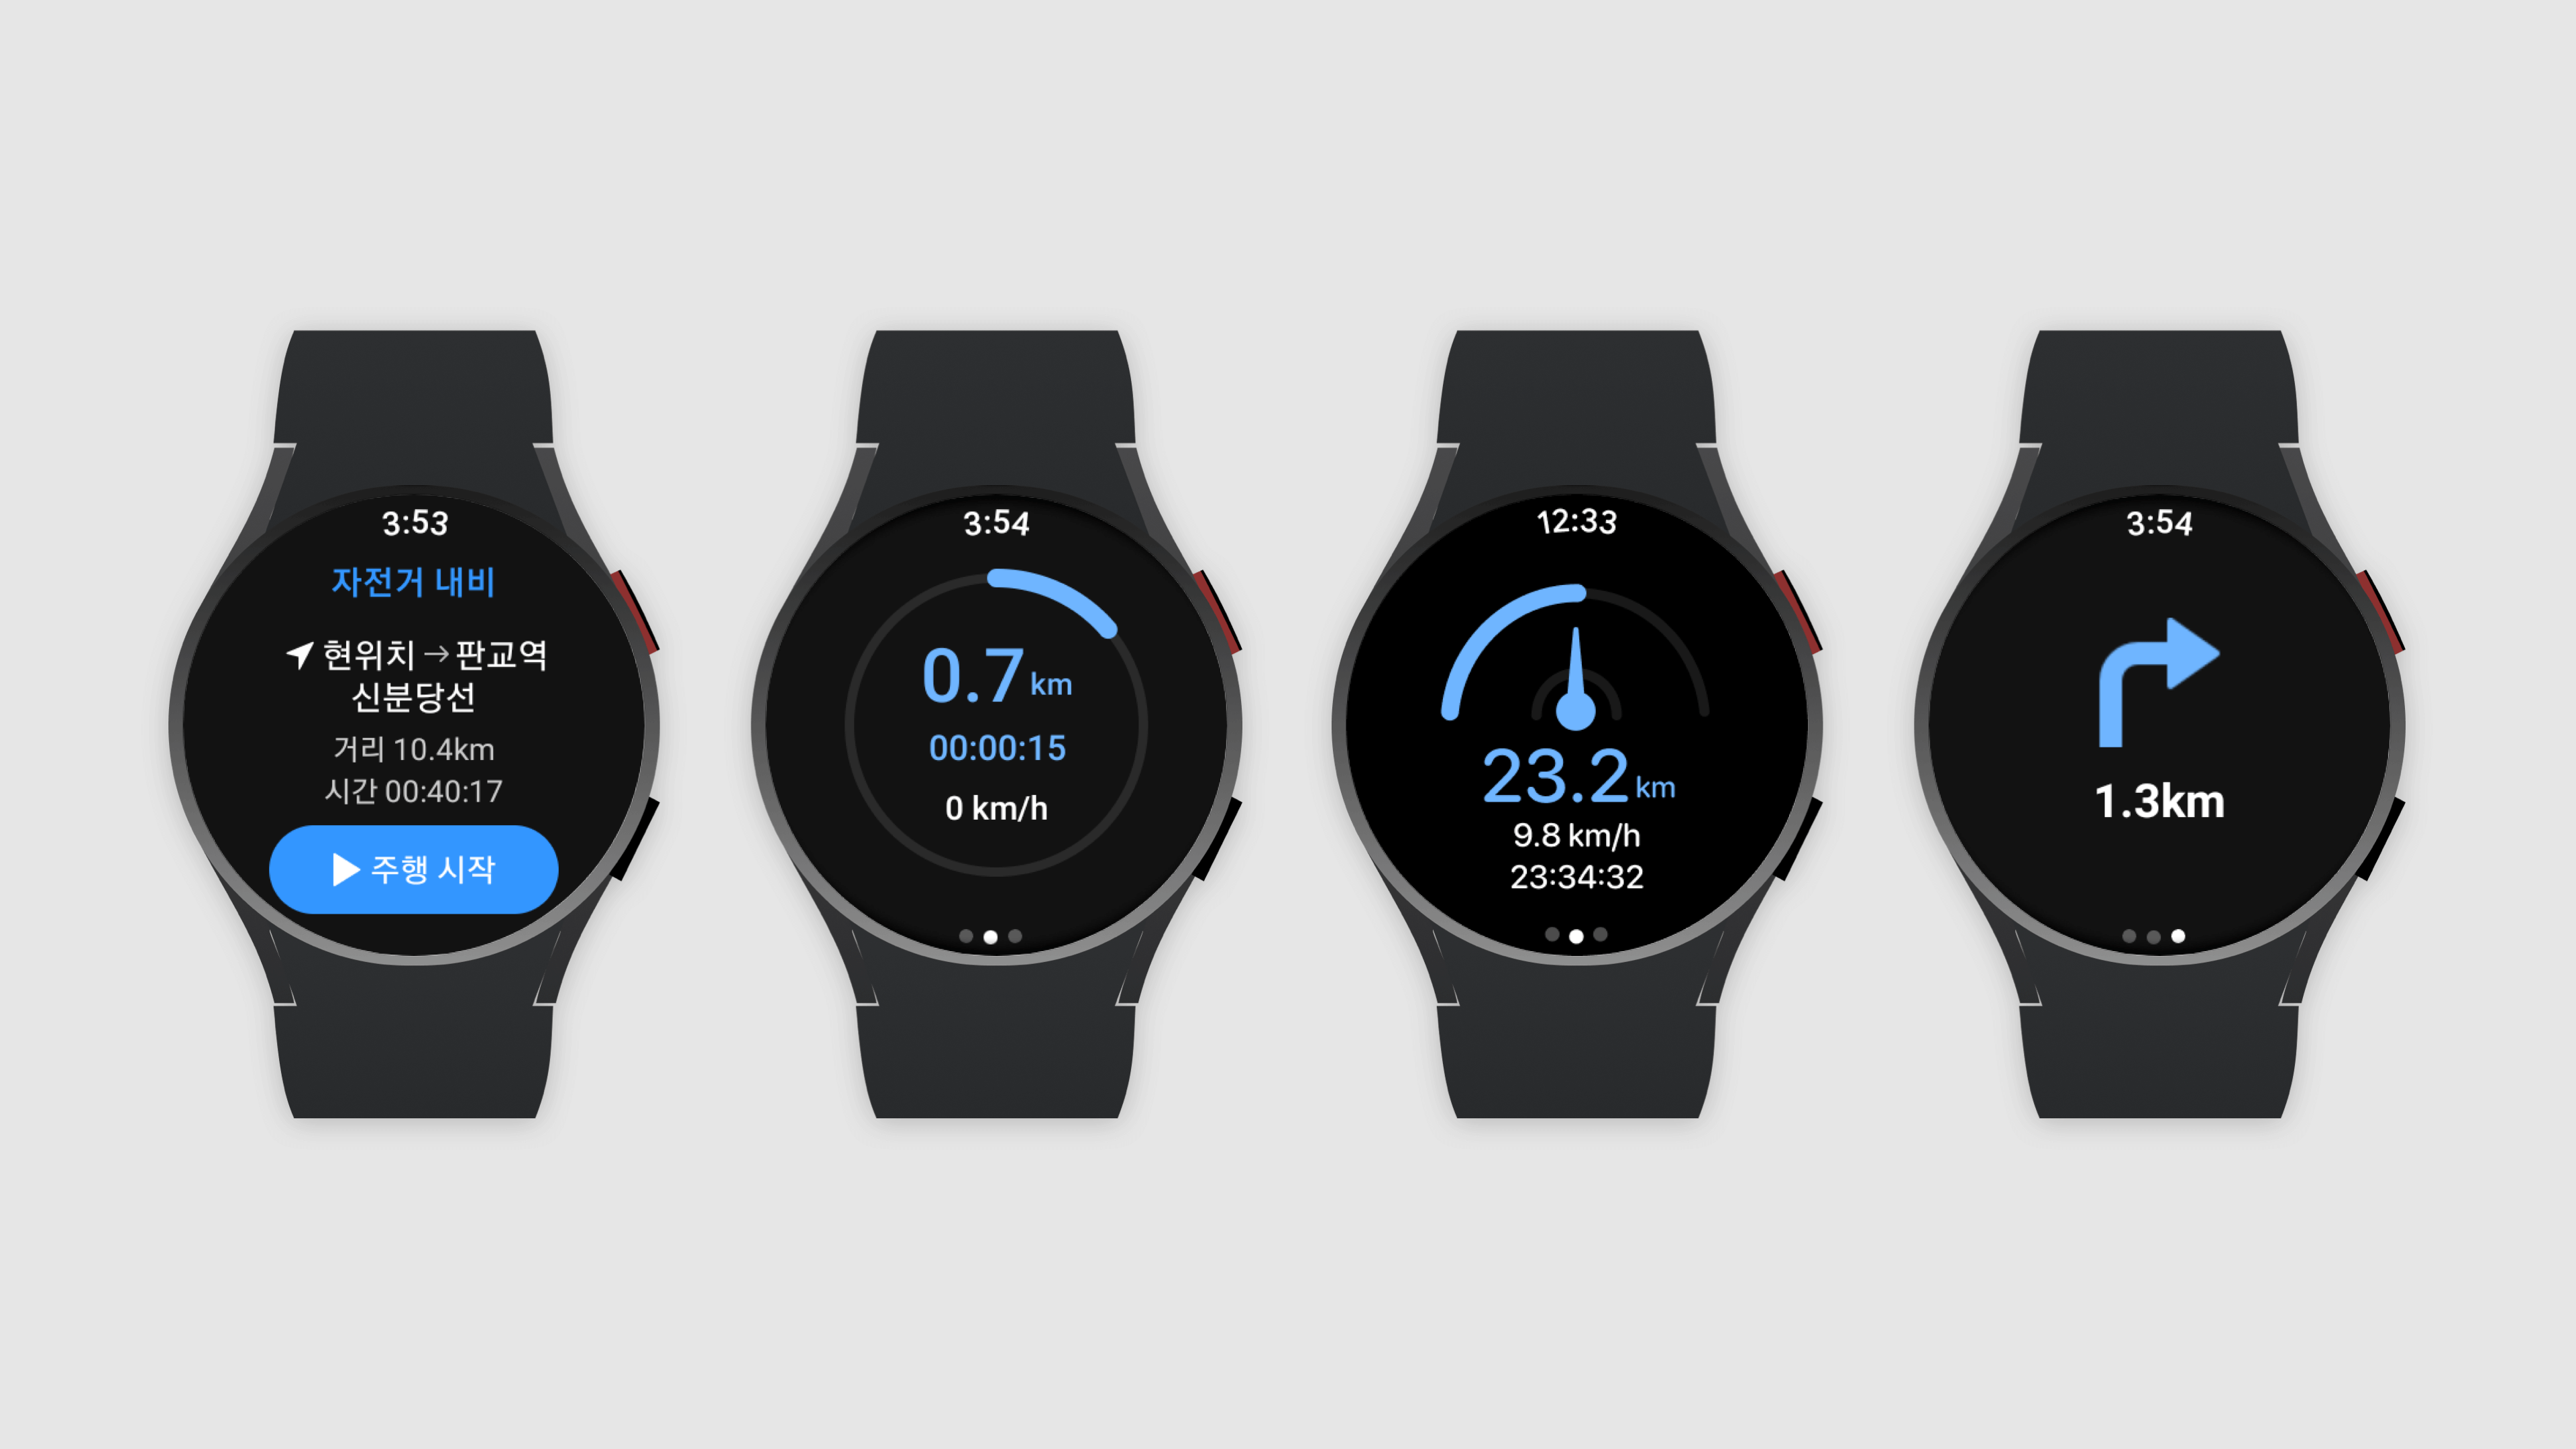 A glimpse of KakaoMap on Wear OS, showcasing its bicycle navigation feature. It supports safe riding with functionalities like real-time tracking and turn-by-turn vibration navigation.